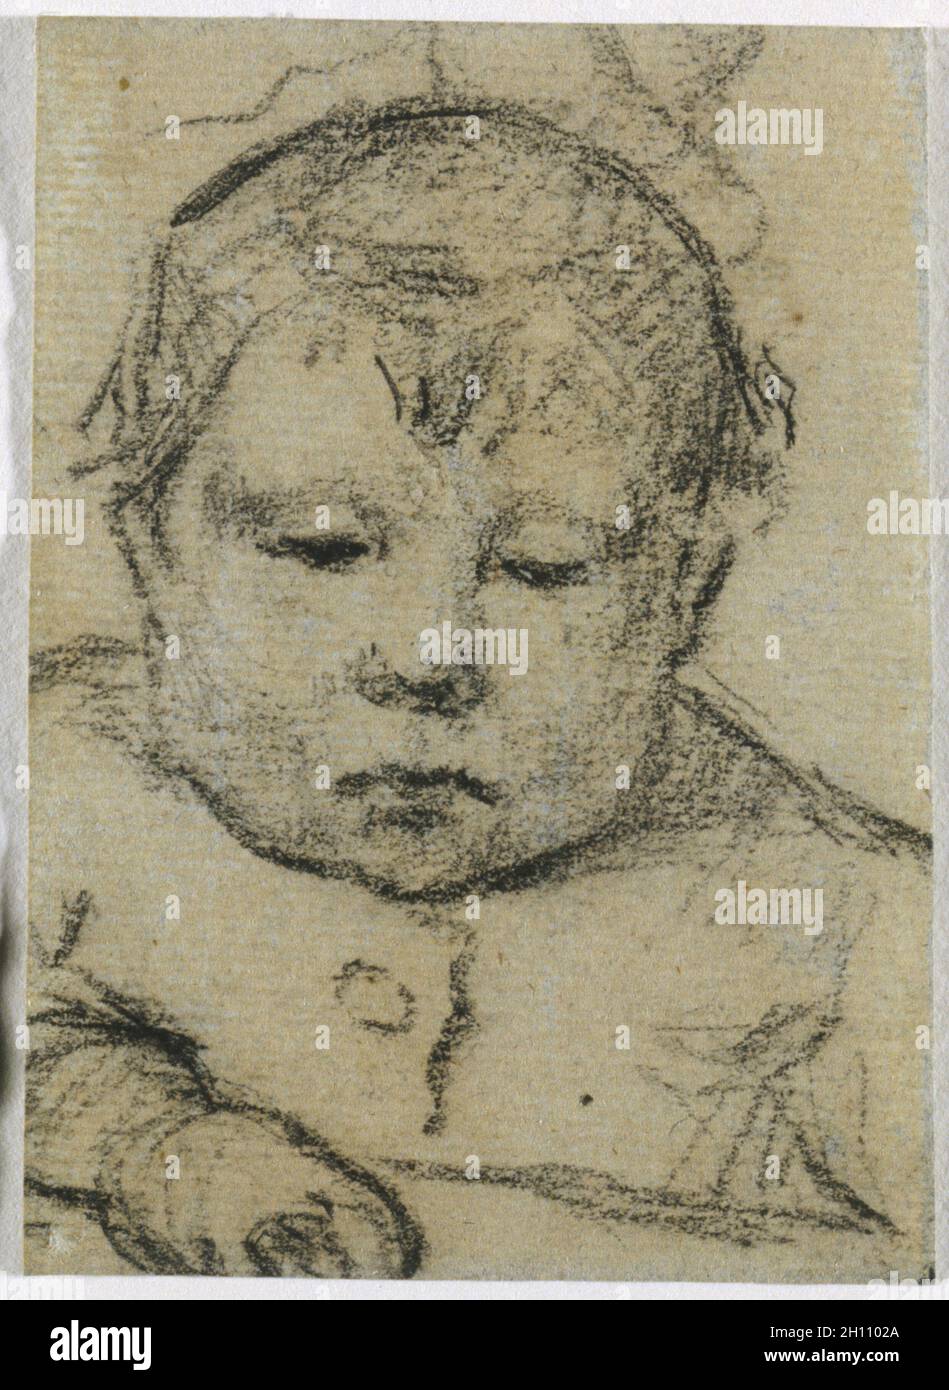 Emil Gauguin as a Child, Right Hand Forward, c. 1875-1876. Paul Gauguin (French, 1848-1903). Black crayon; sheet: 9.8 x 7.1 cm (3 7/8 x 2 13/16 in.). Stock Photo